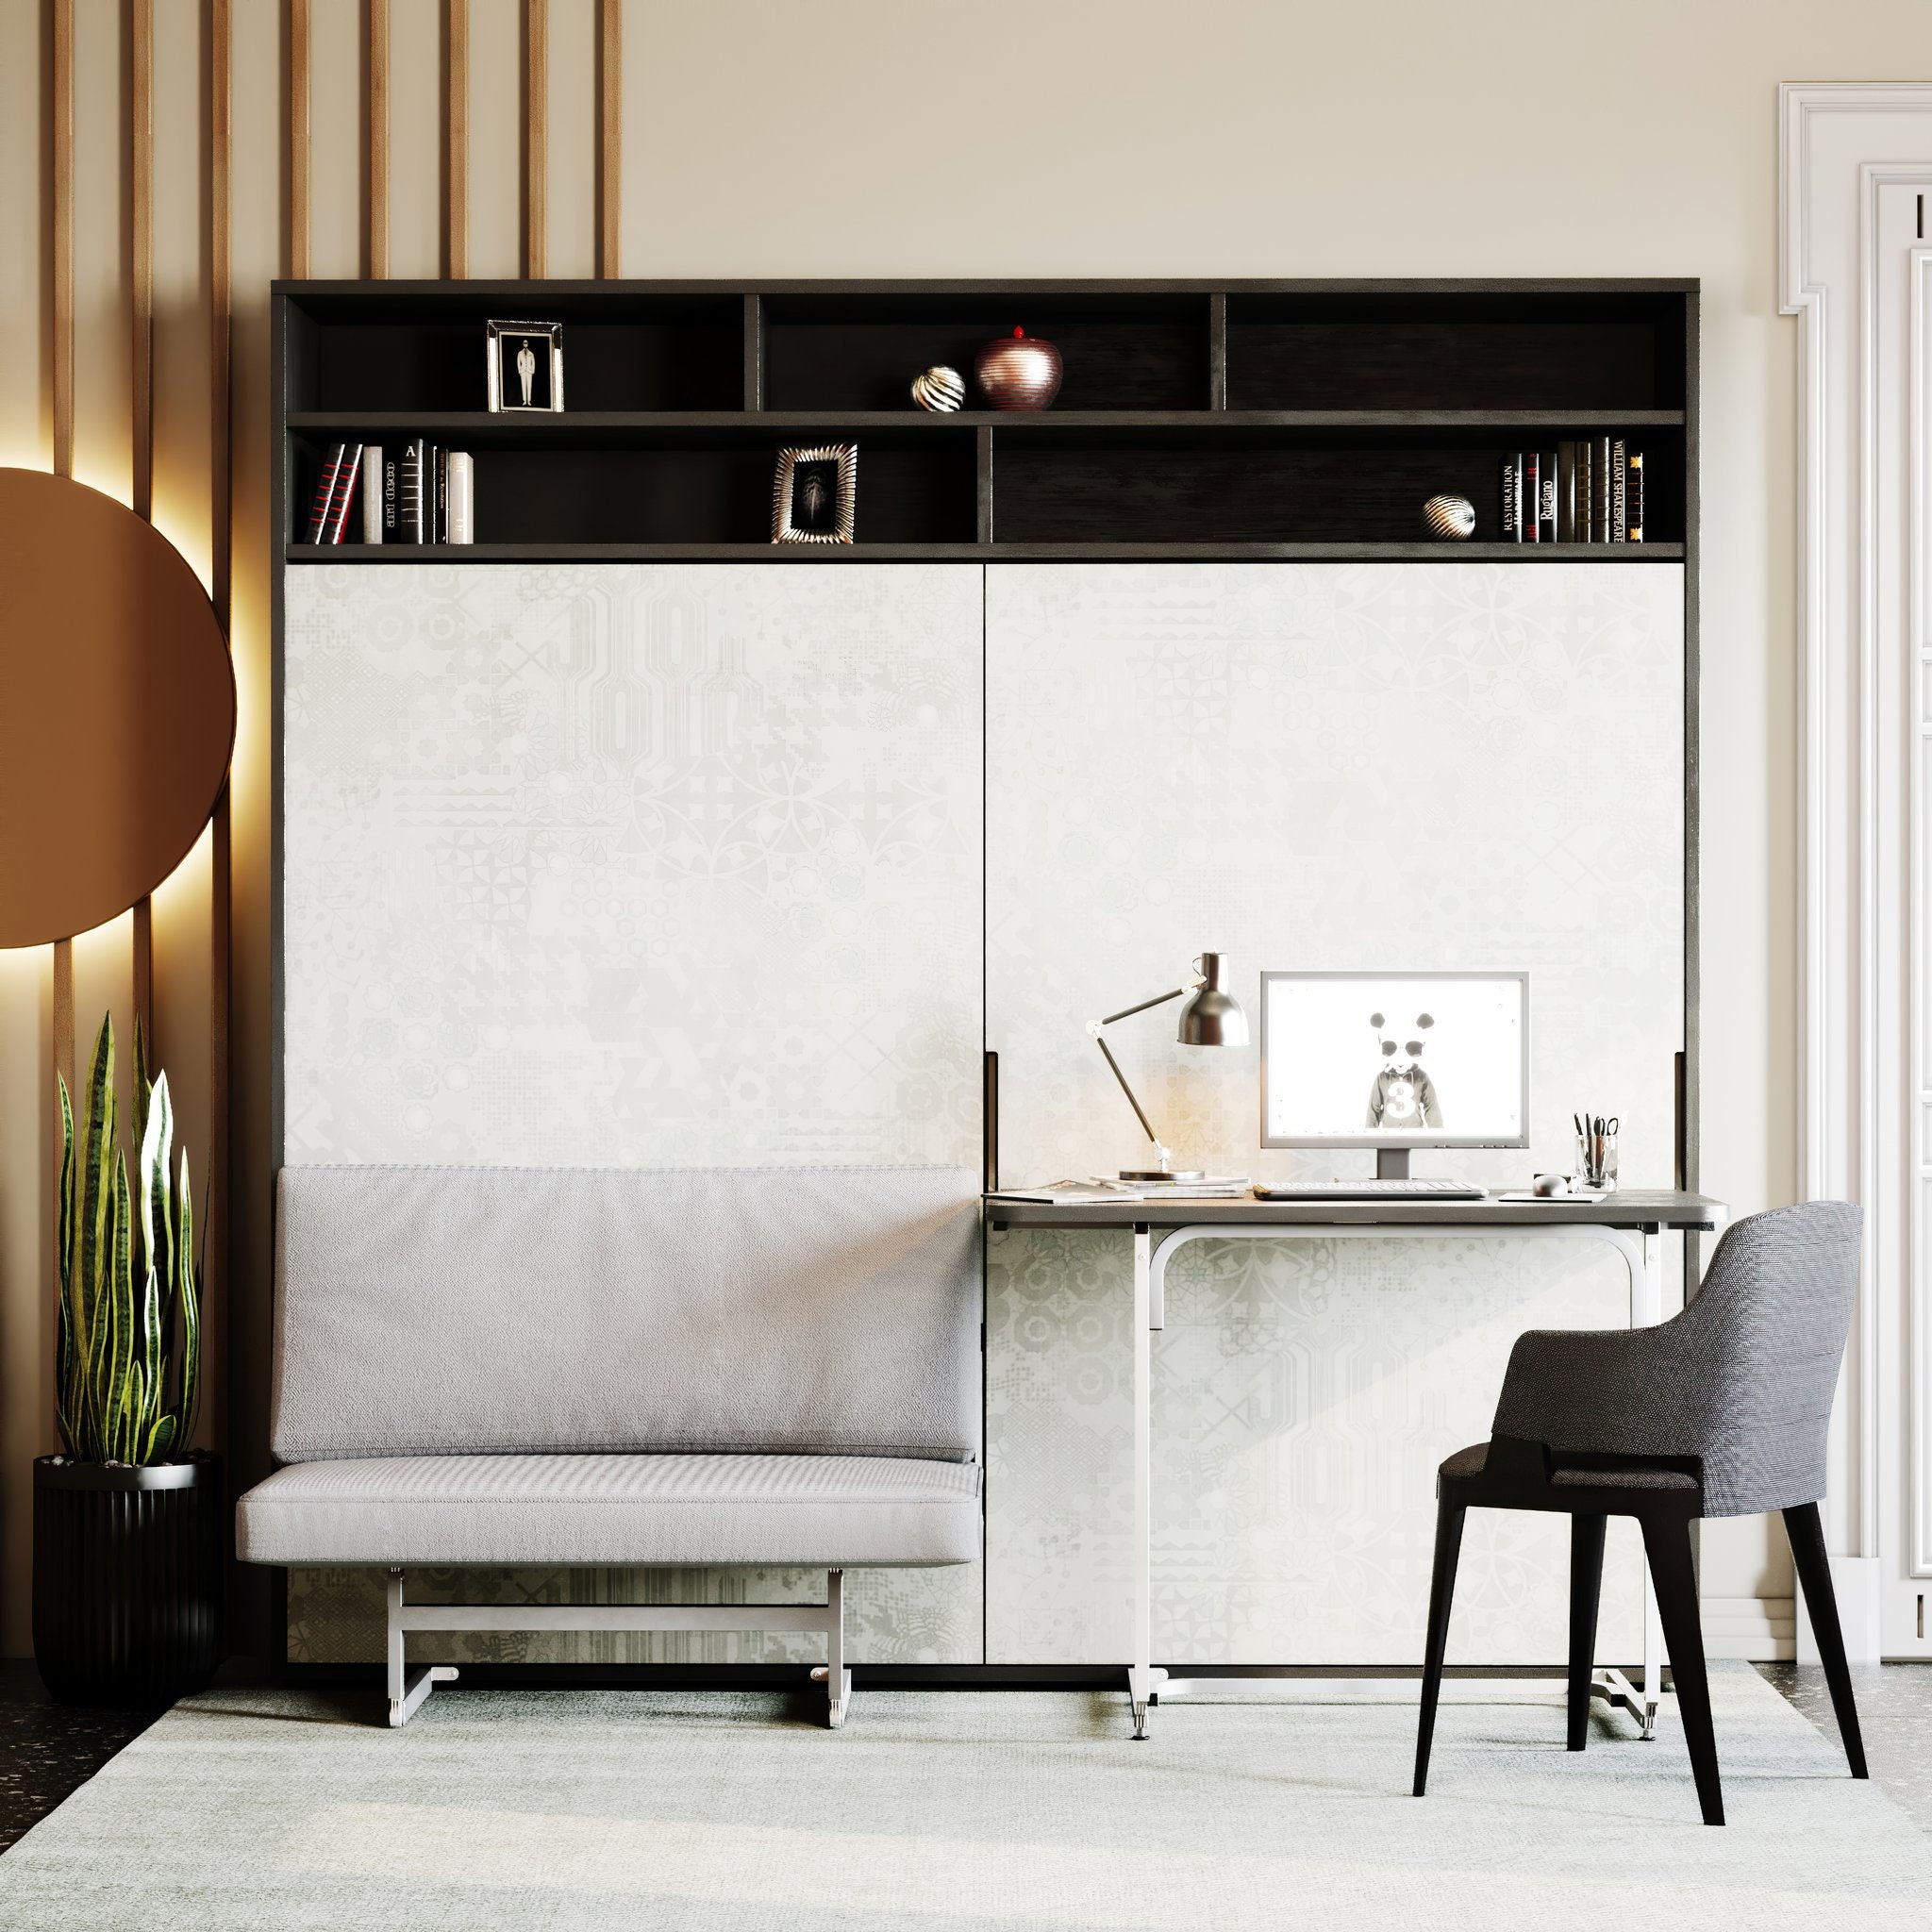 Modern Murphy Bed with Sofa Desk and Shelves 20 in 20 Smart   Etsy.de